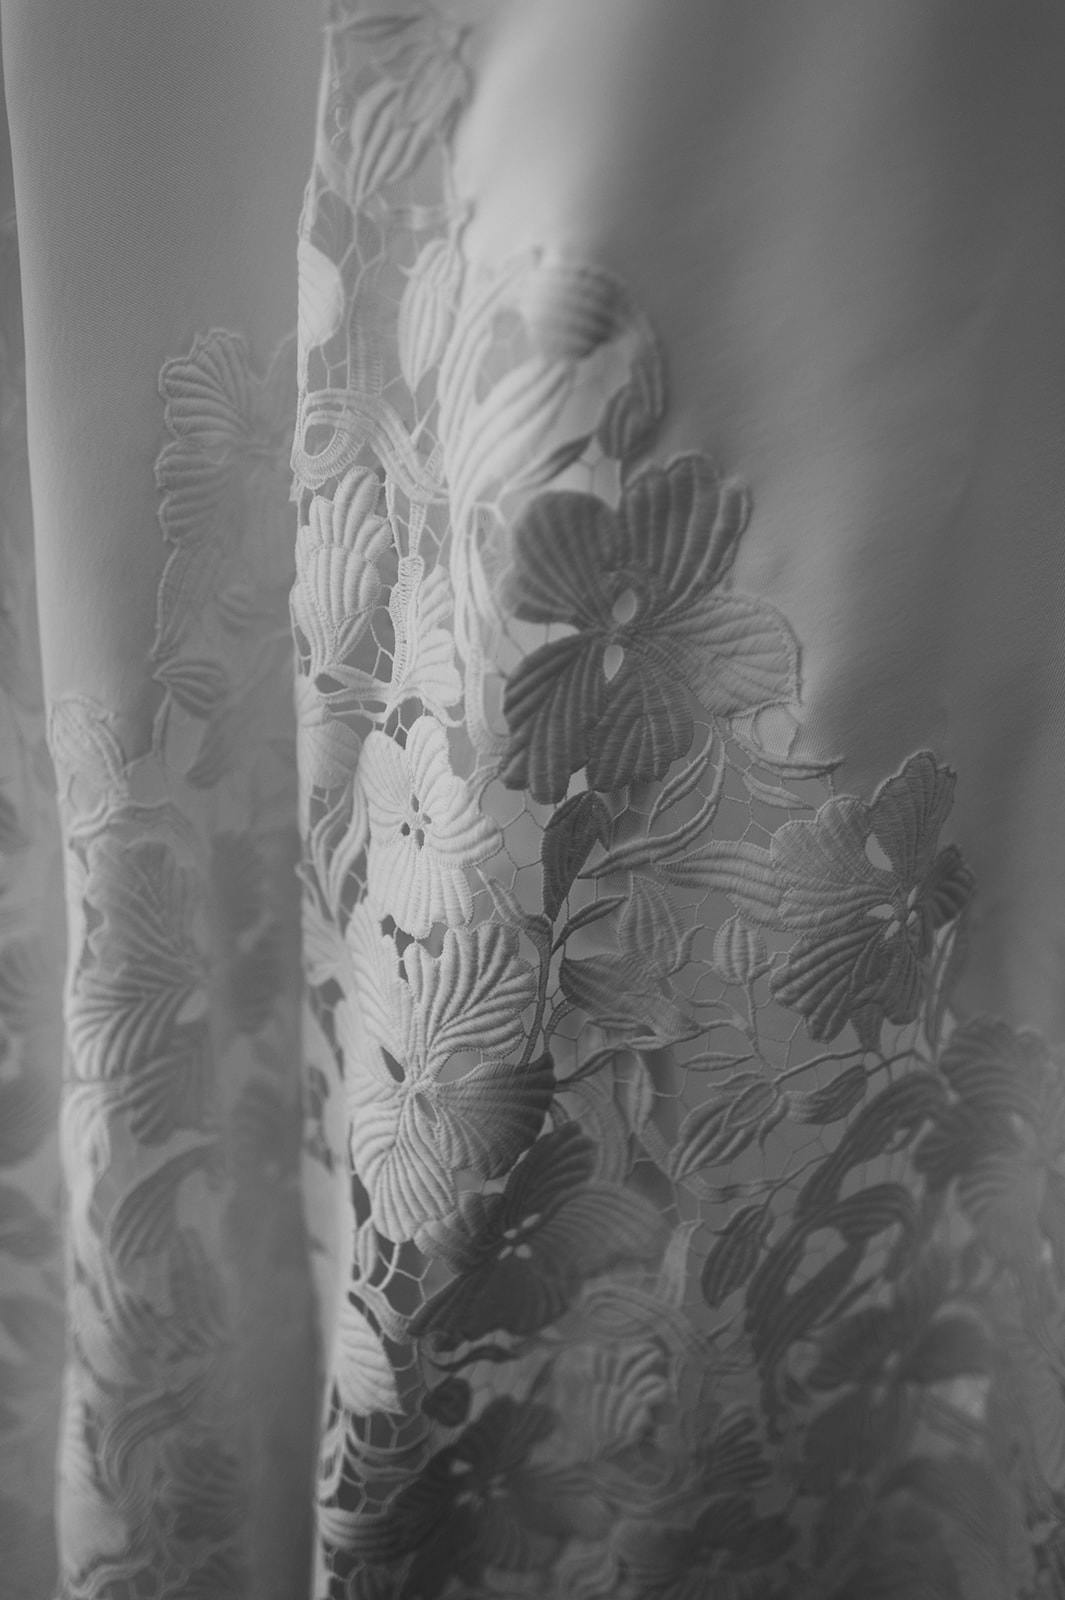 Black and white close-up of a delicate lace fabric featuring intricate floral patterns. The lace appears to be draped, creating soft, flowing folds with varying light and shadow effects.